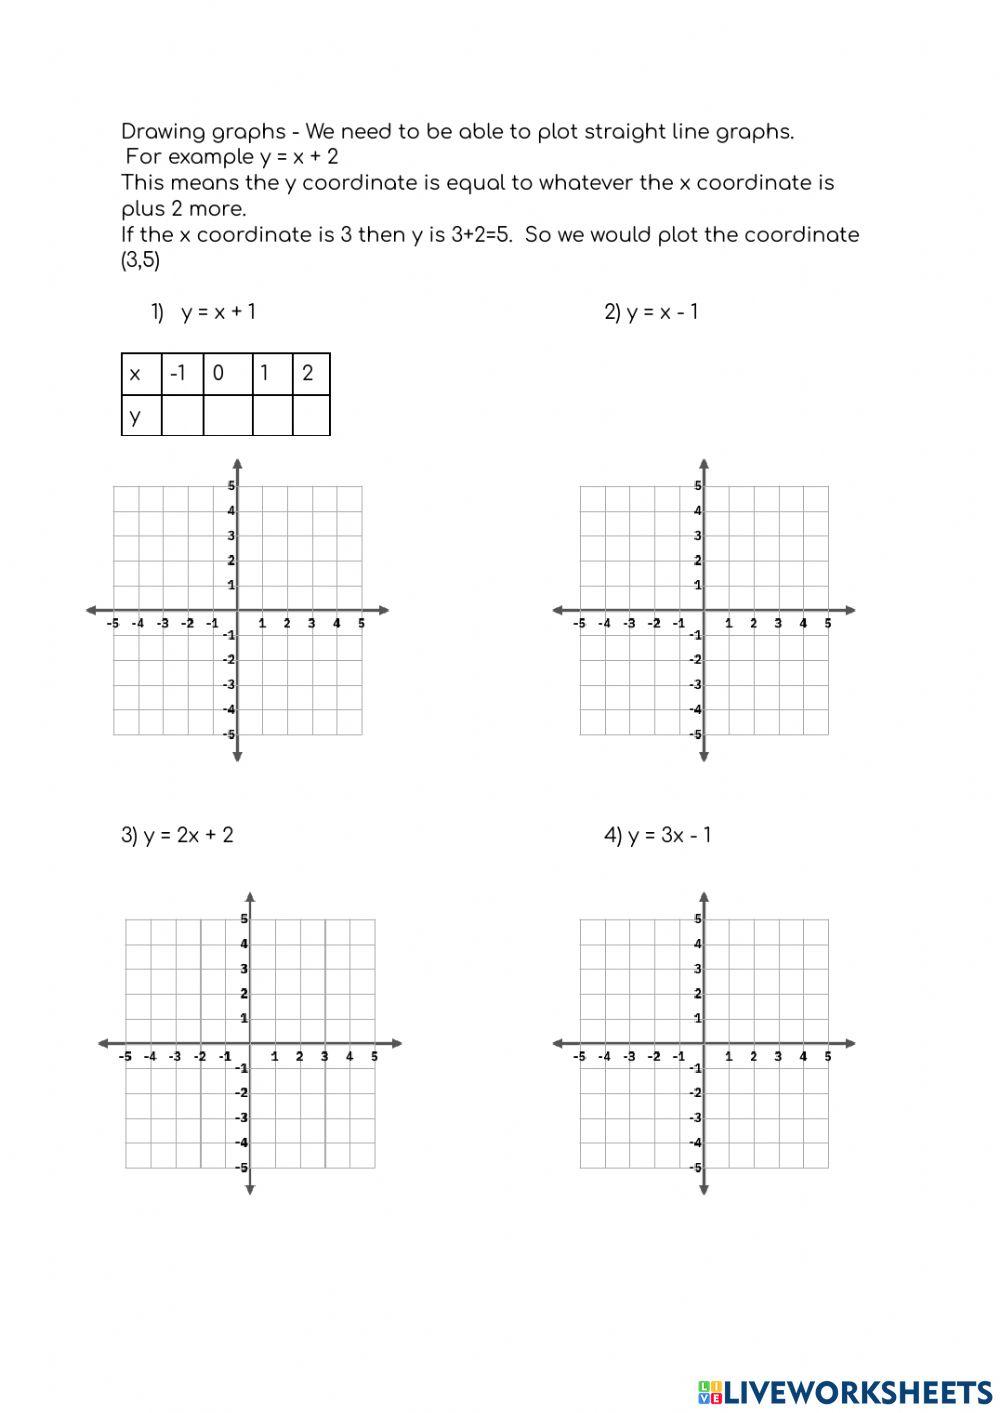 Straight line graphs and simultaneous equations